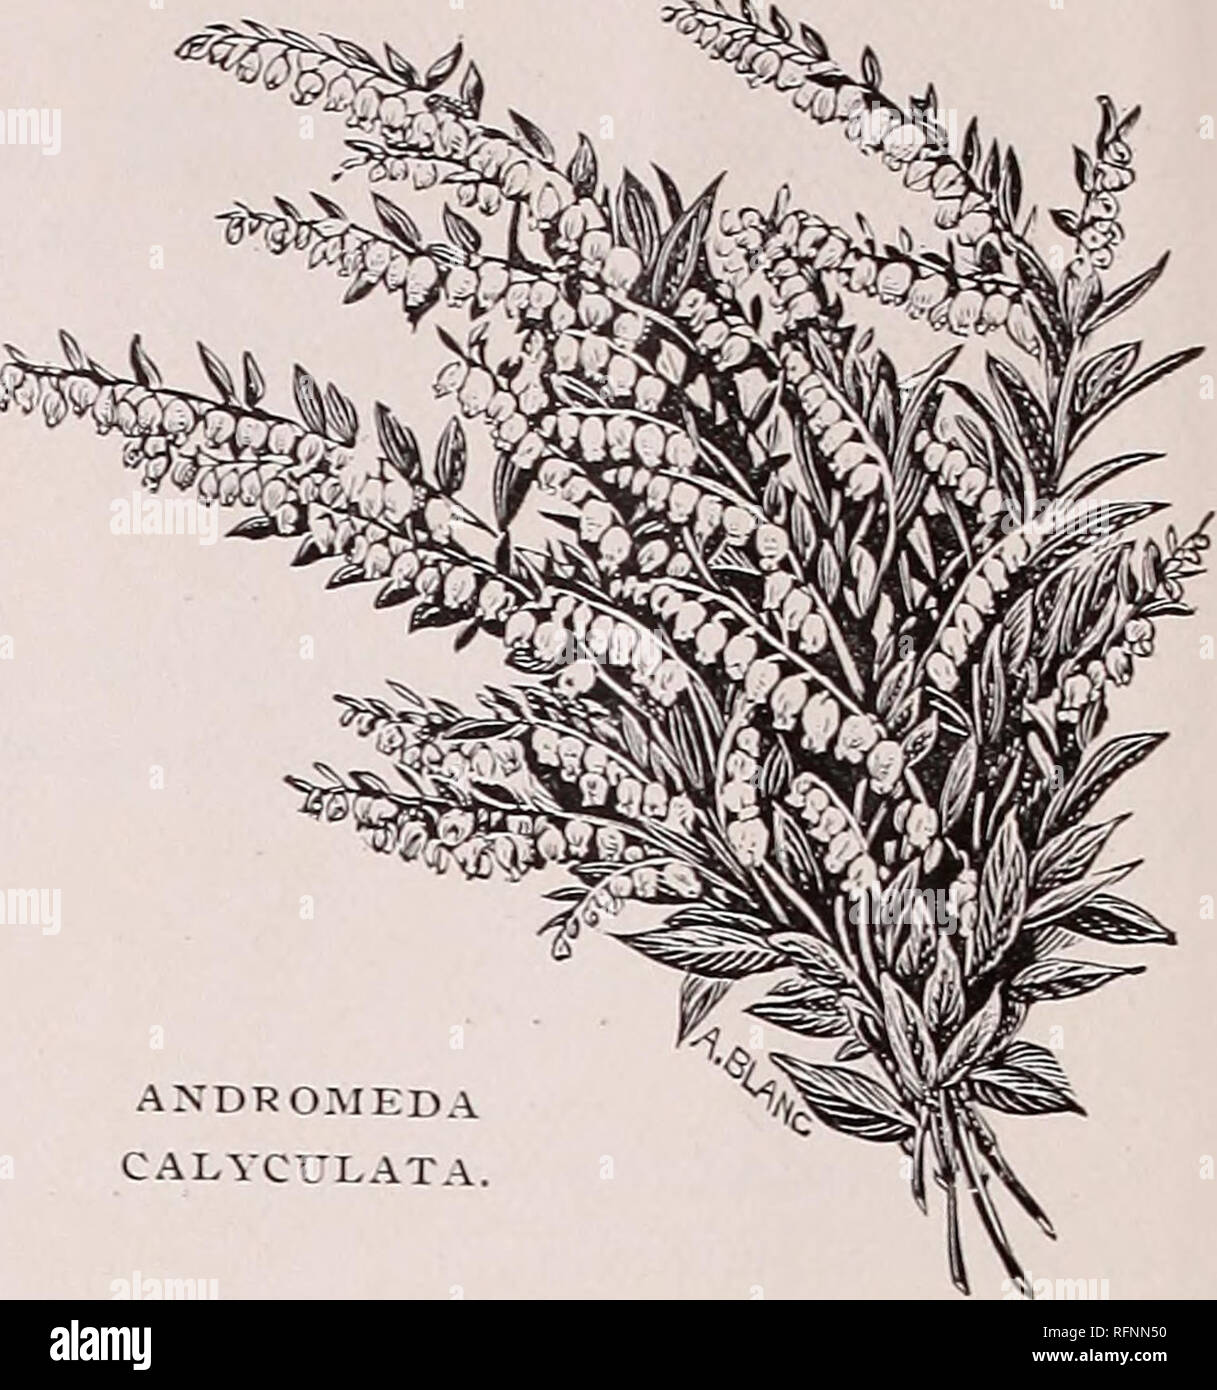 . Trade catalogue of American plants and shrubs. Nurseries (Horticulture) New Jersey Hammonton Catalogs; Plants, Ornamental Catalogs; Ornamental shrubs Catalogs; Flowers Catalogs. Wm. F. Bassett &amp; Son, Hammonton, New Jersey. Andromeda Mariana. 8 to 12 in. 60 cts. per doz., $4 per 100, $30 per i.oco. Andromeda Mariana. 1 to 2 ft. $1 per doz., $5 per 100, $40 per 1,000. (Have fine stock of A. Mariana in nursery, 2 and 3 years old.) 1 to 2 ft., Col. 50 cts. per doz., $2 per 100, $15 per 1,000. Andromeda raceniosa. 1 to 2 ft 80c. per doz., $5 per 100, $40 per 1,000. 1 to 2 ft., Col. 60 cts. pe Stock Photo